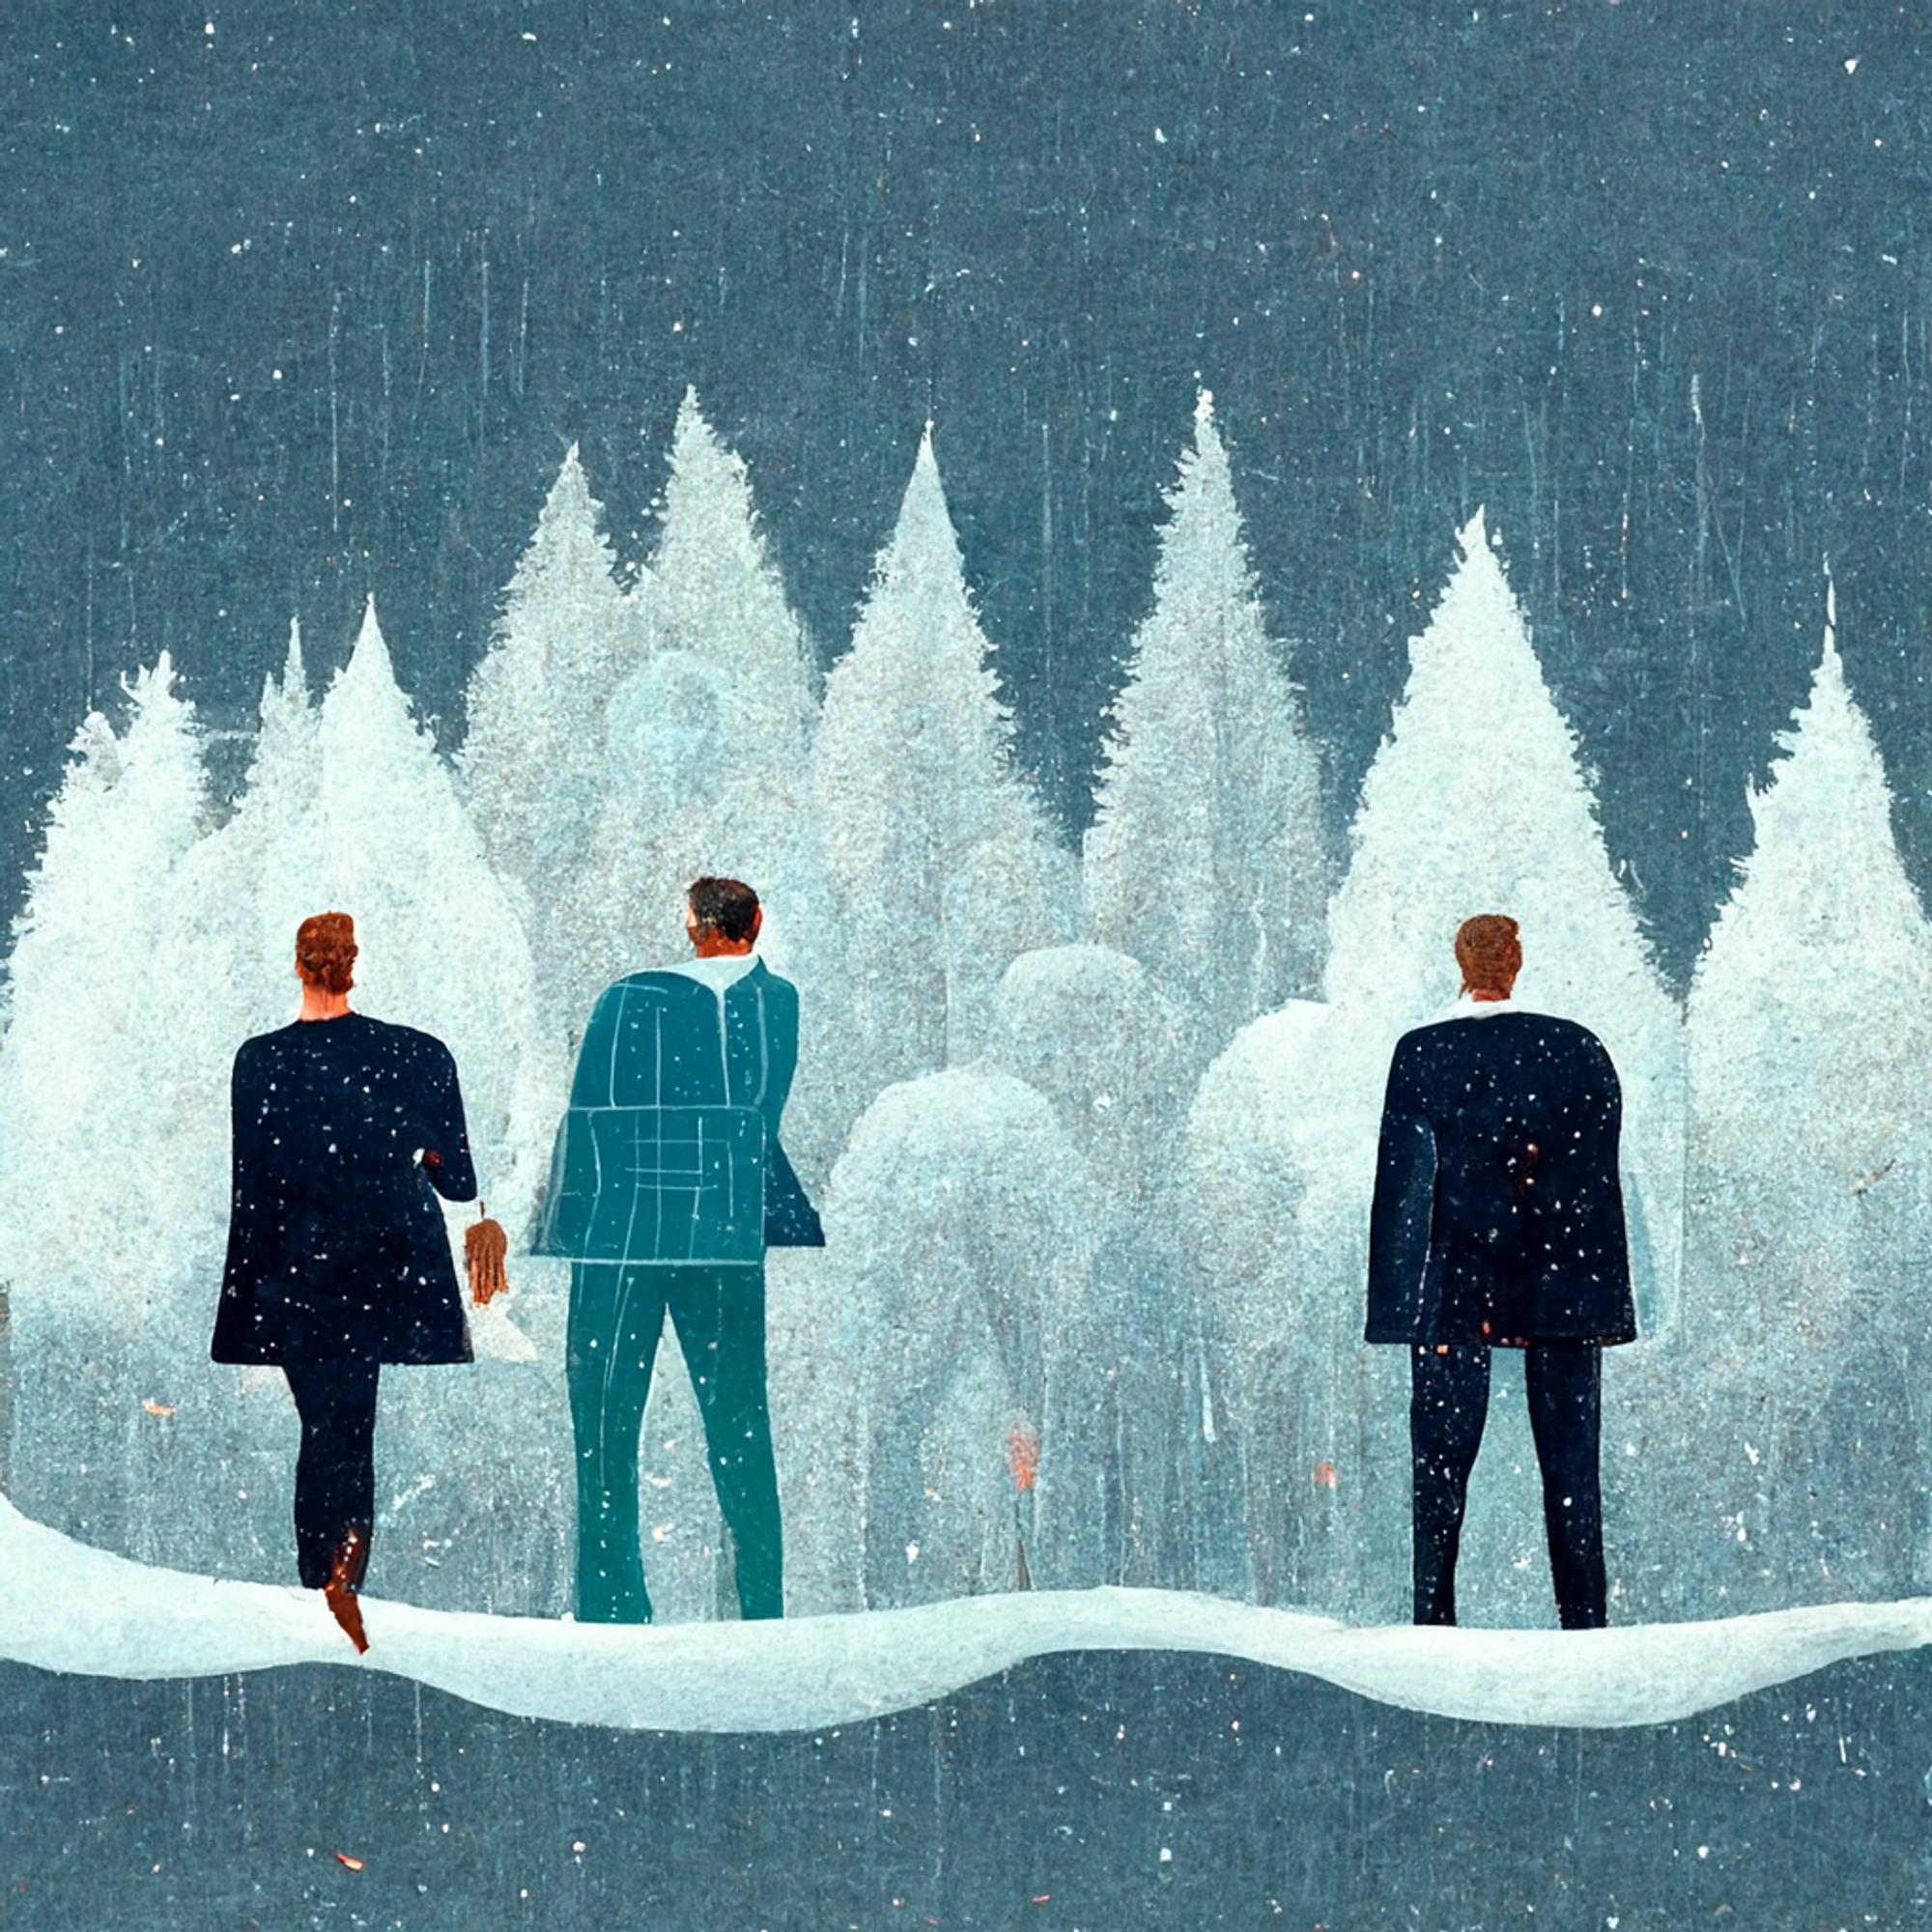 imagine an ultrarealistic illustration of three venture capitalists, made up of two men and one woman, with snow falling on them, with a winter forest background